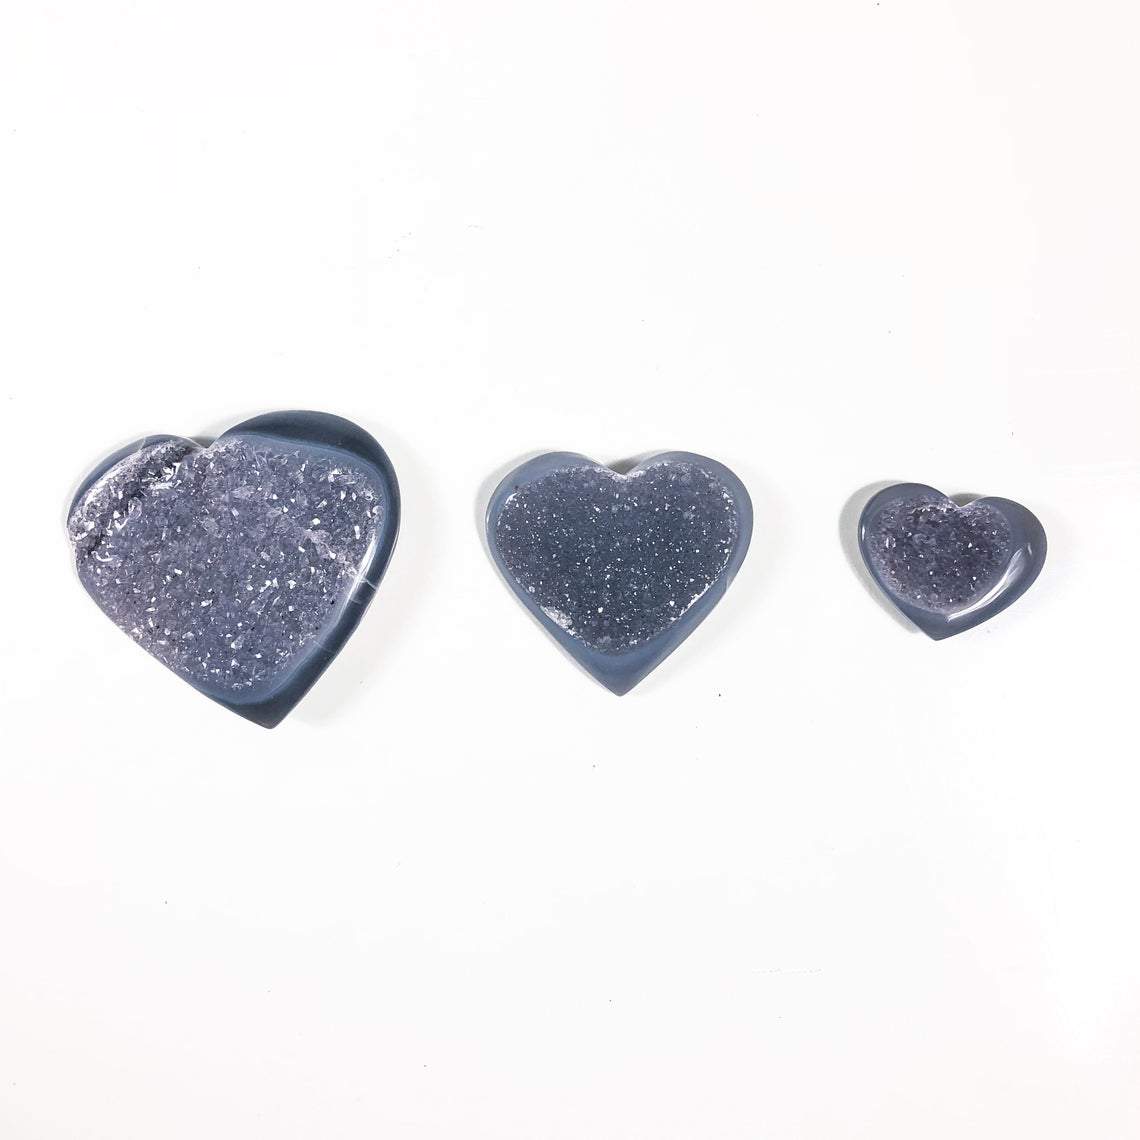 Three Agate Druzy Hearts shown to display weight comparision.